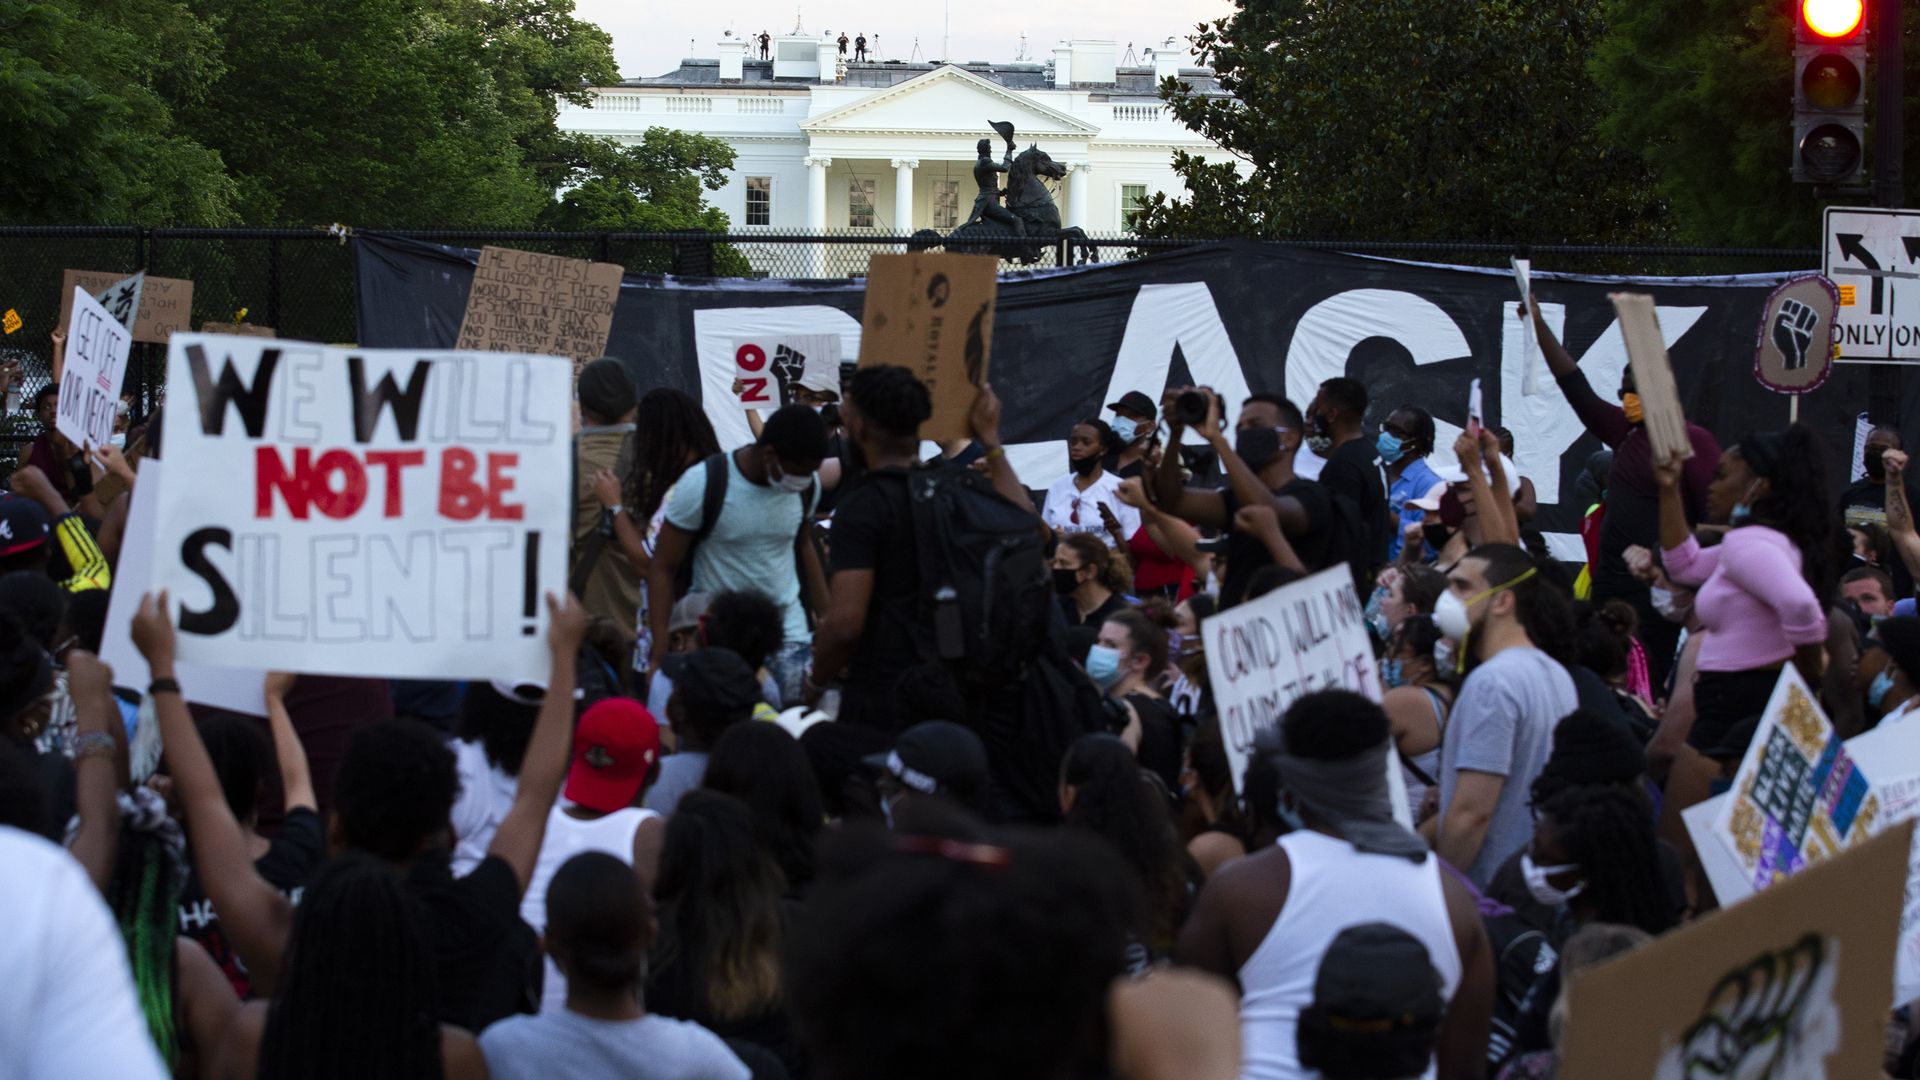 Protesters gather north of Lafayette Square near the White House during a demonstration against racism and police brutality, in Washington, DC 